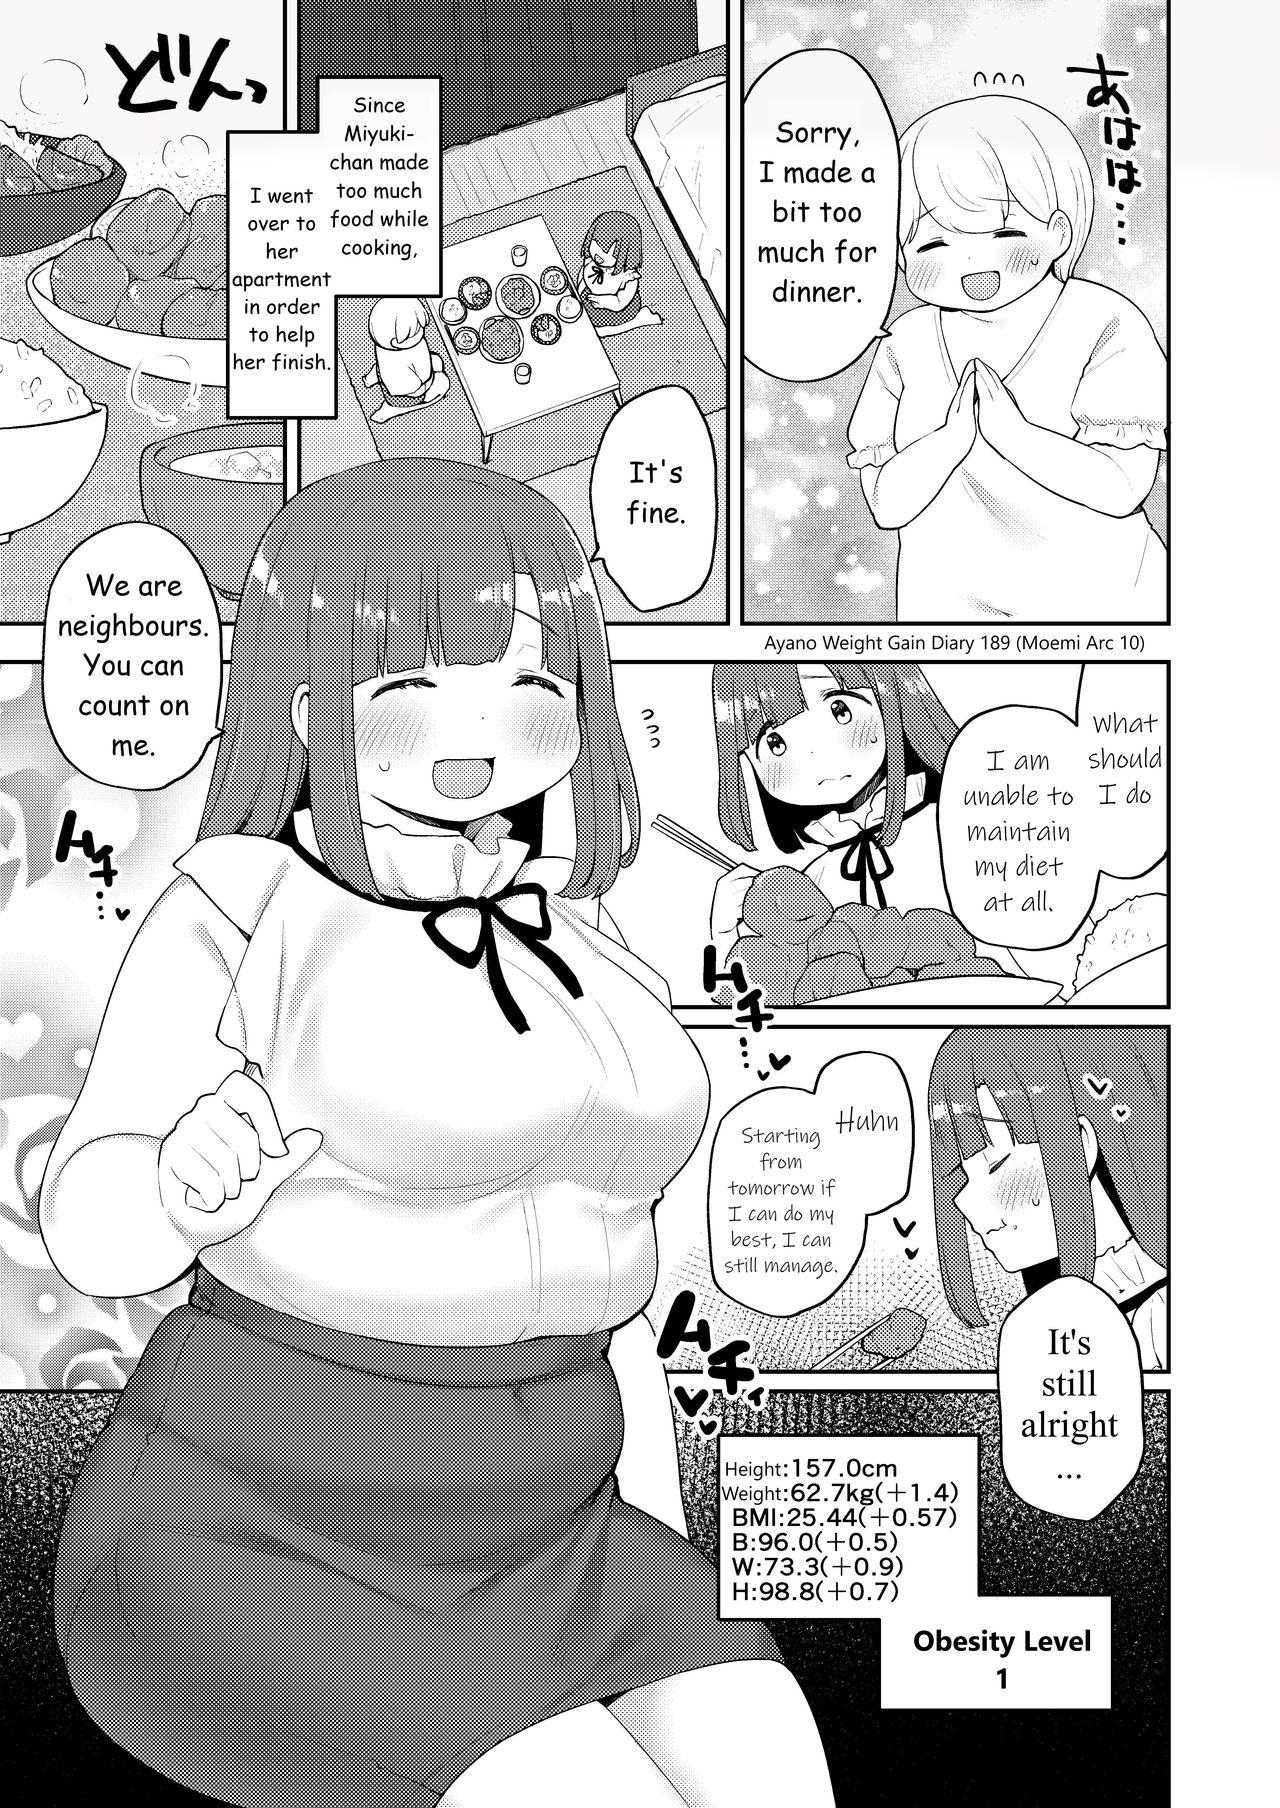 Shorts Ayano's Weight Gain Diary Pick Up - Page 189